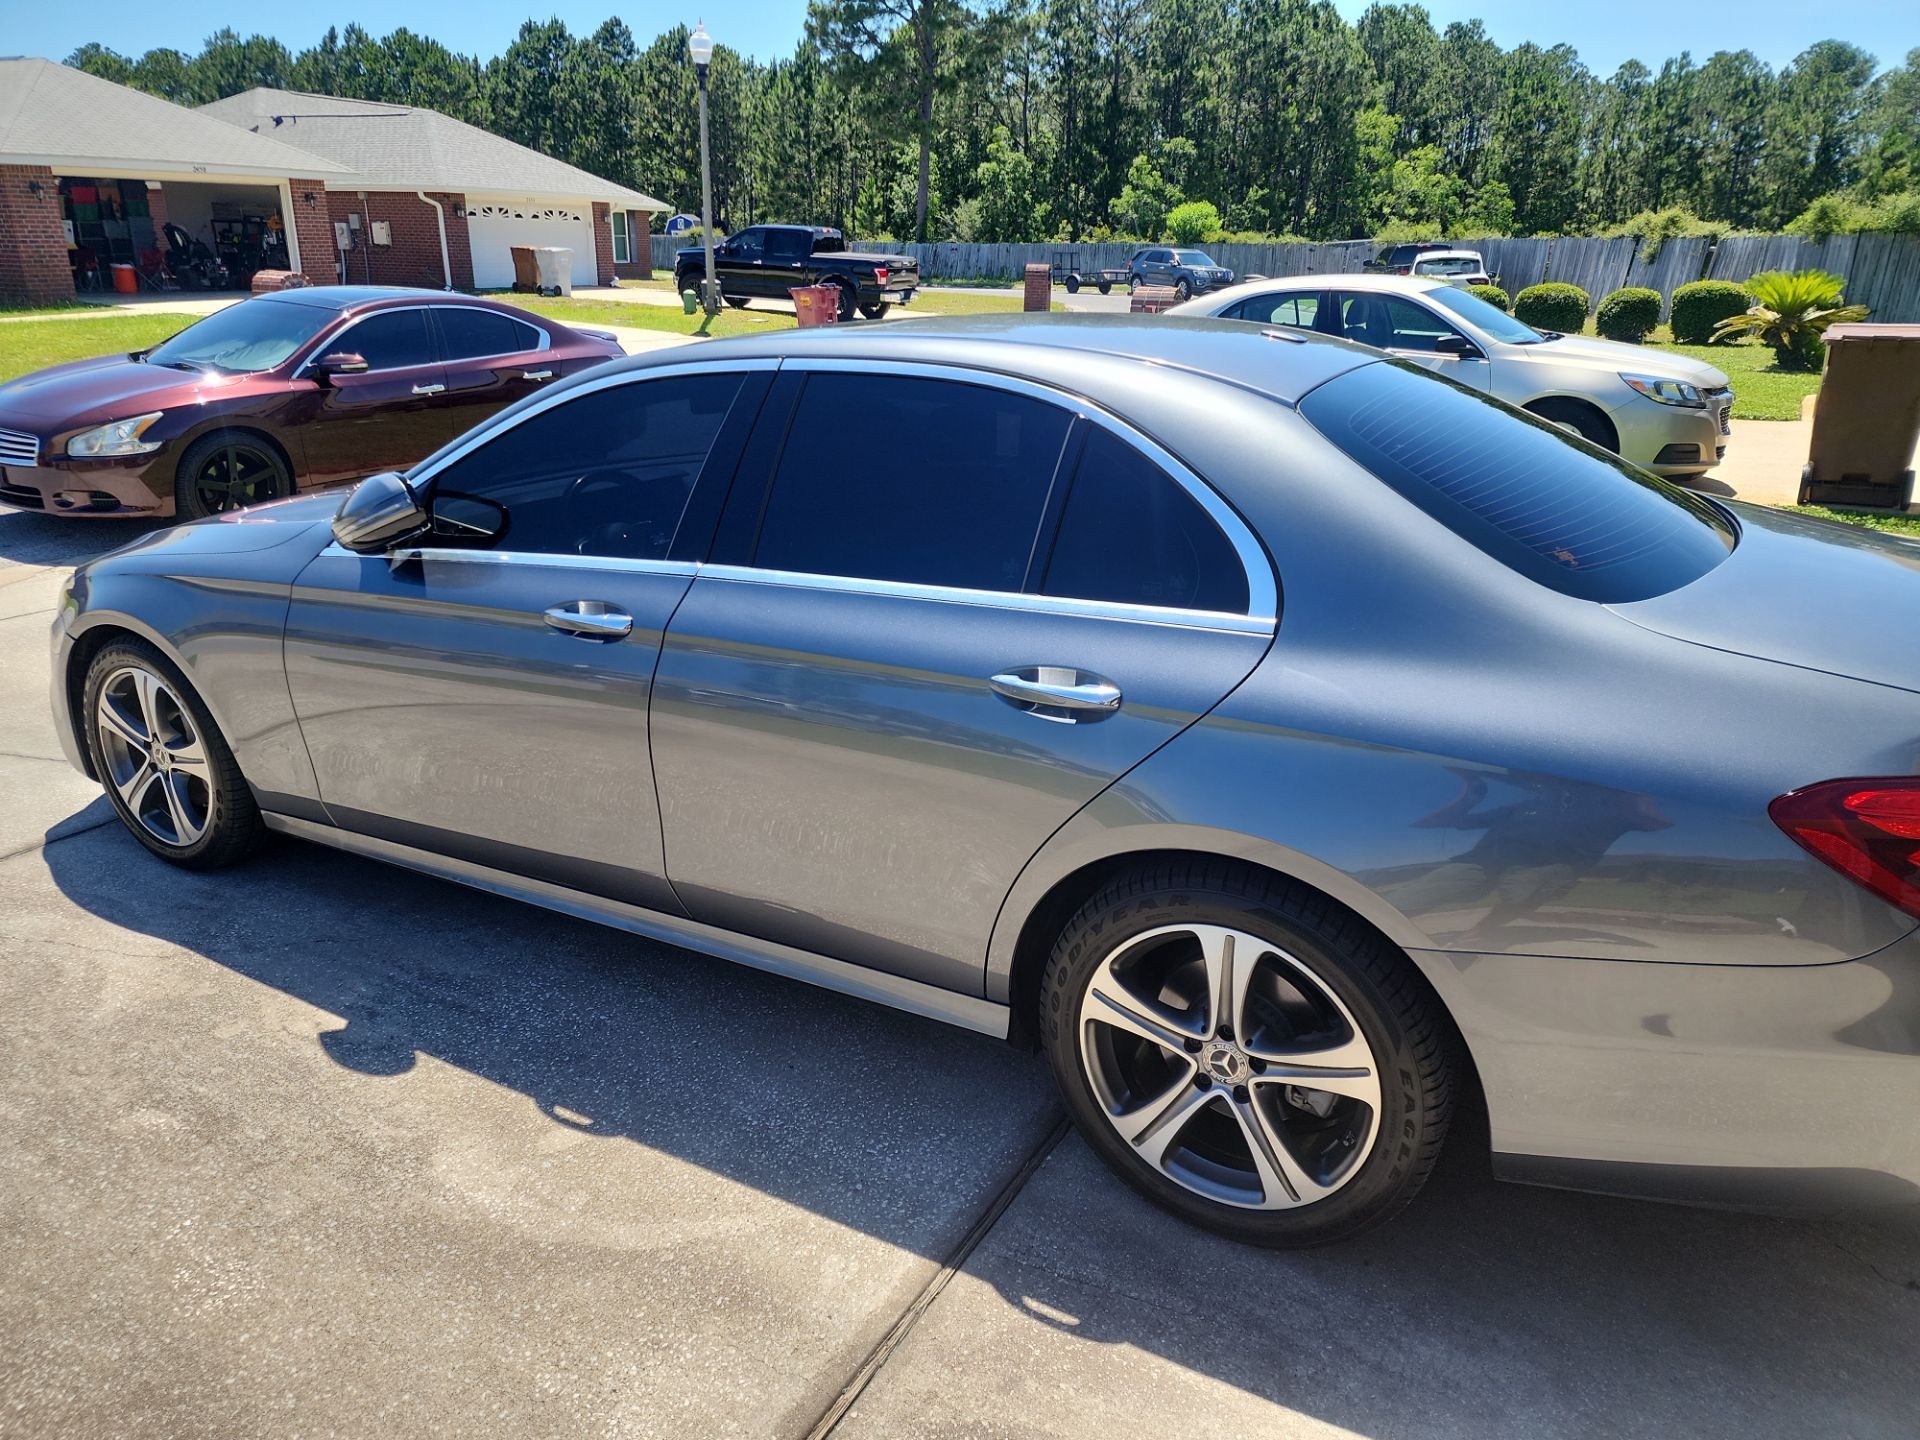 the car appears to have its windows tinted the tint adds privacy and reduces glare and heat from sunlight inside the vehicle the work looks professional with no visible bubbles or peeling edges likely providing uv protection as well